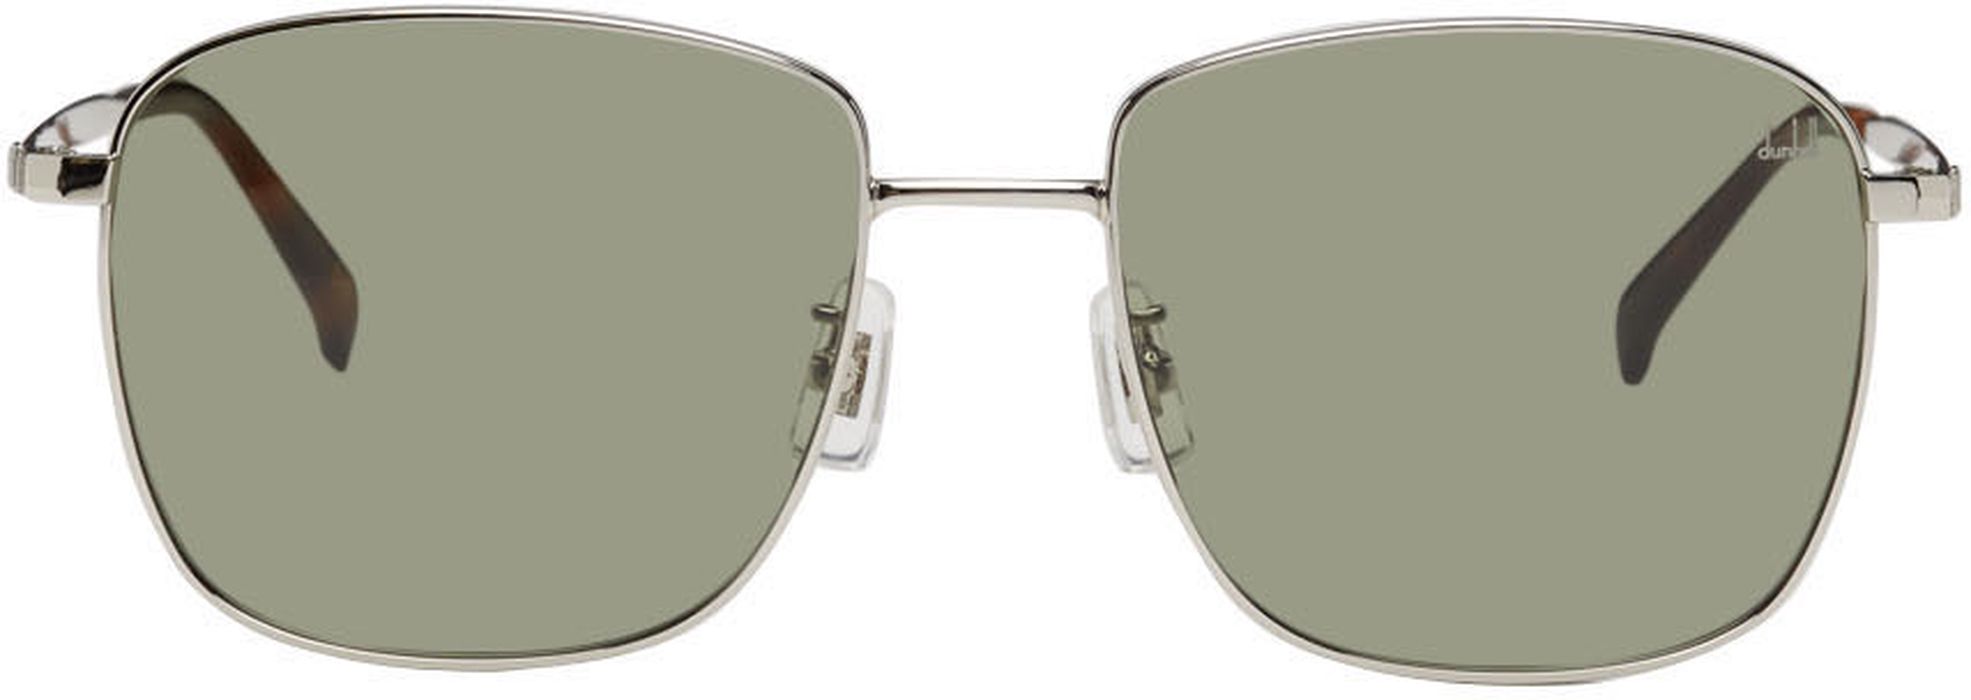 Dunhill Silver Square-Framed Sunglasses